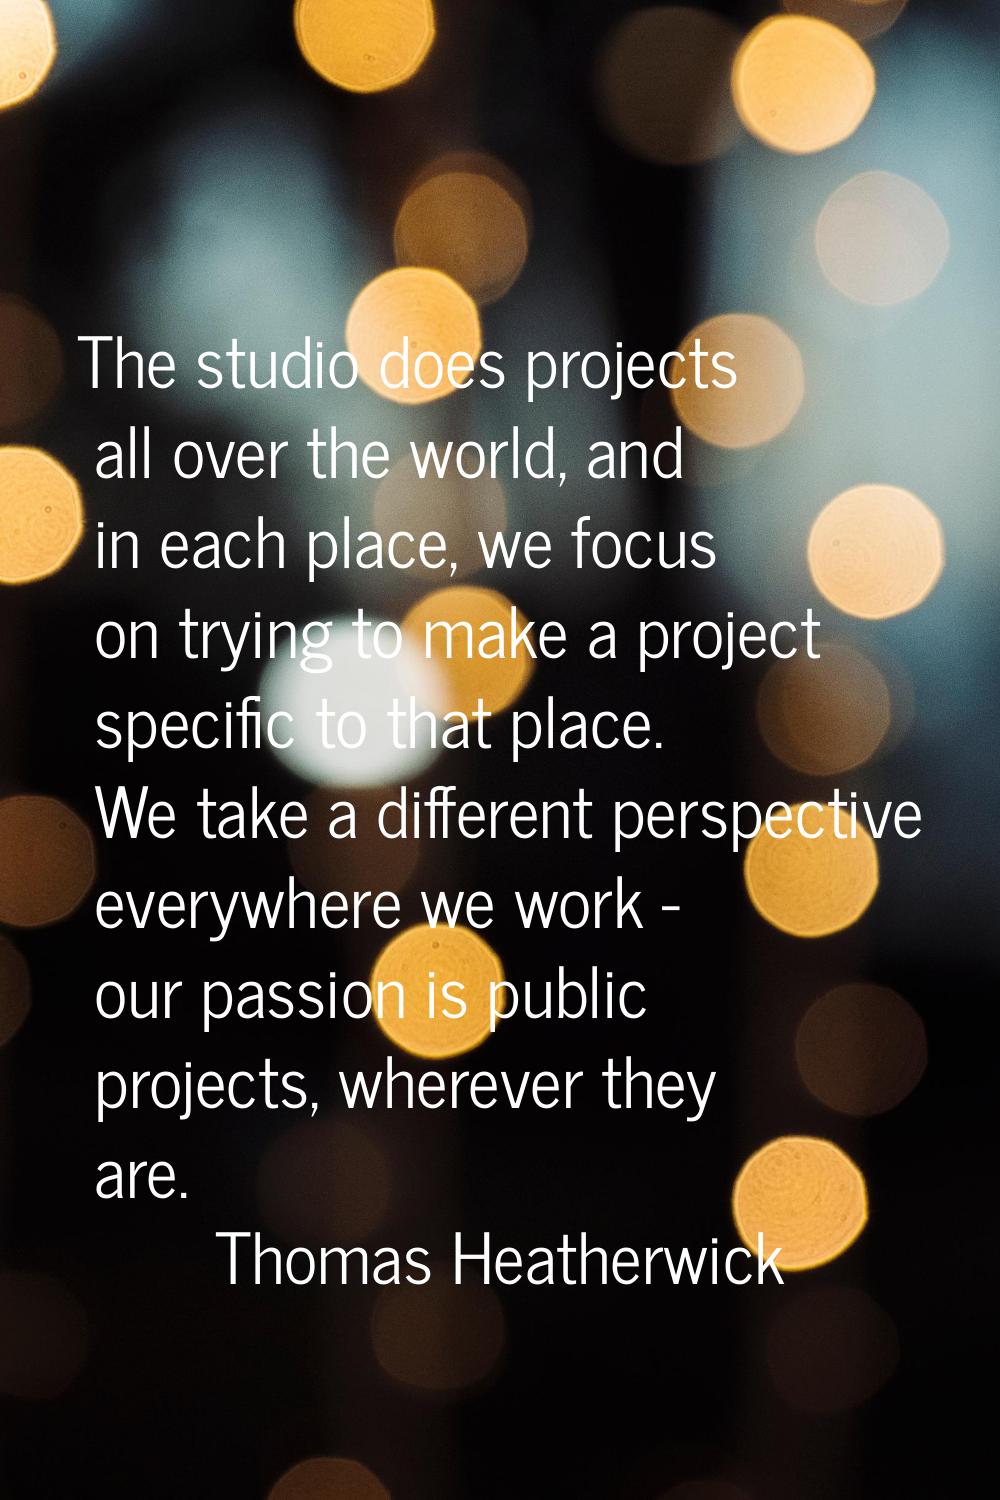 The studio does projects all over the world, and in each place, we focus on trying to make a projec